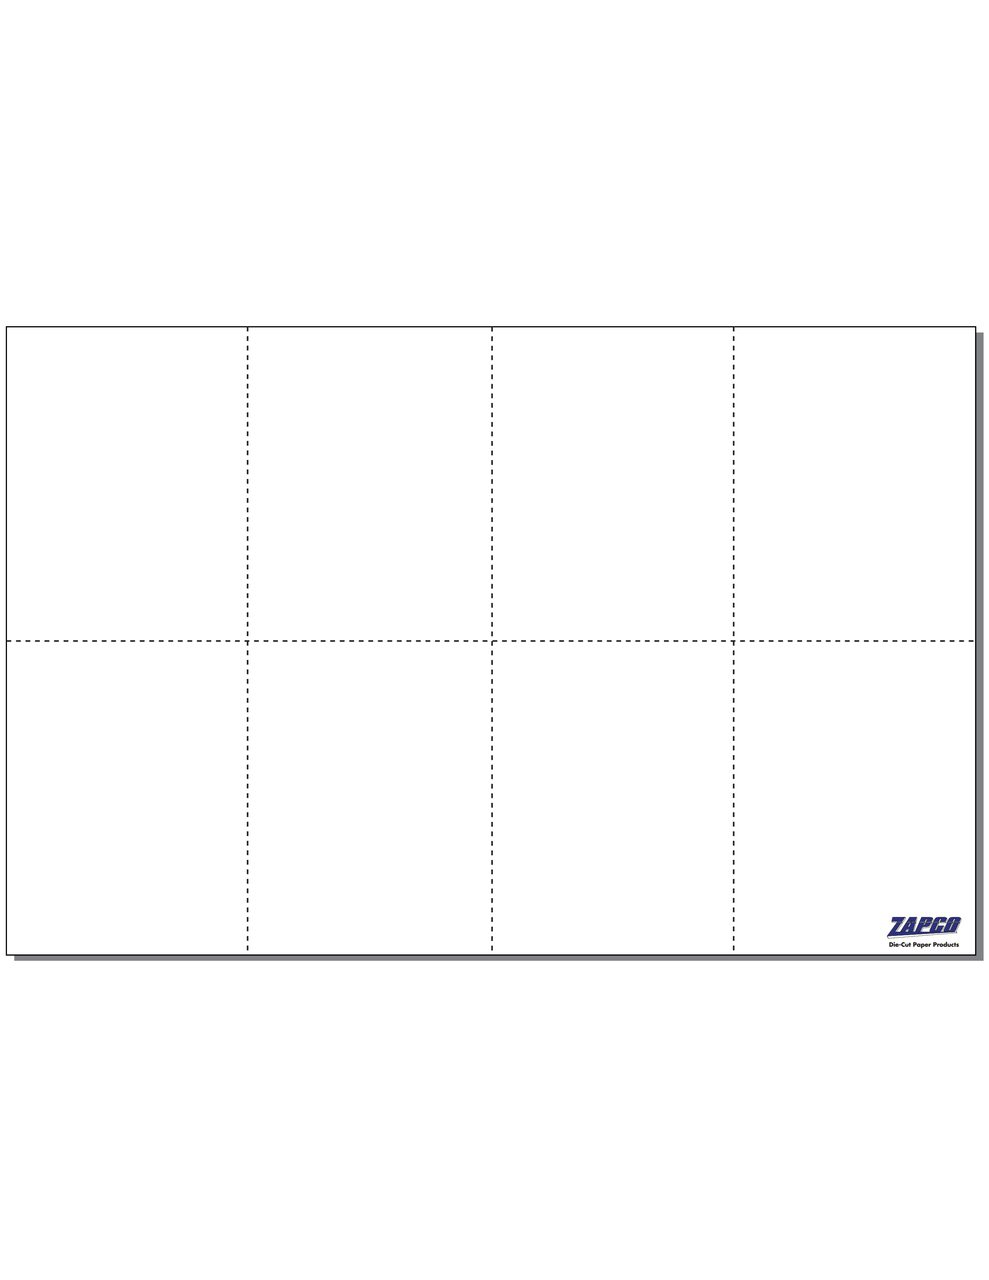 Item 604: 8-up 4 1/4" x 5 1/2" Post Cards 11" x 17" Sheet(250 Sheets)